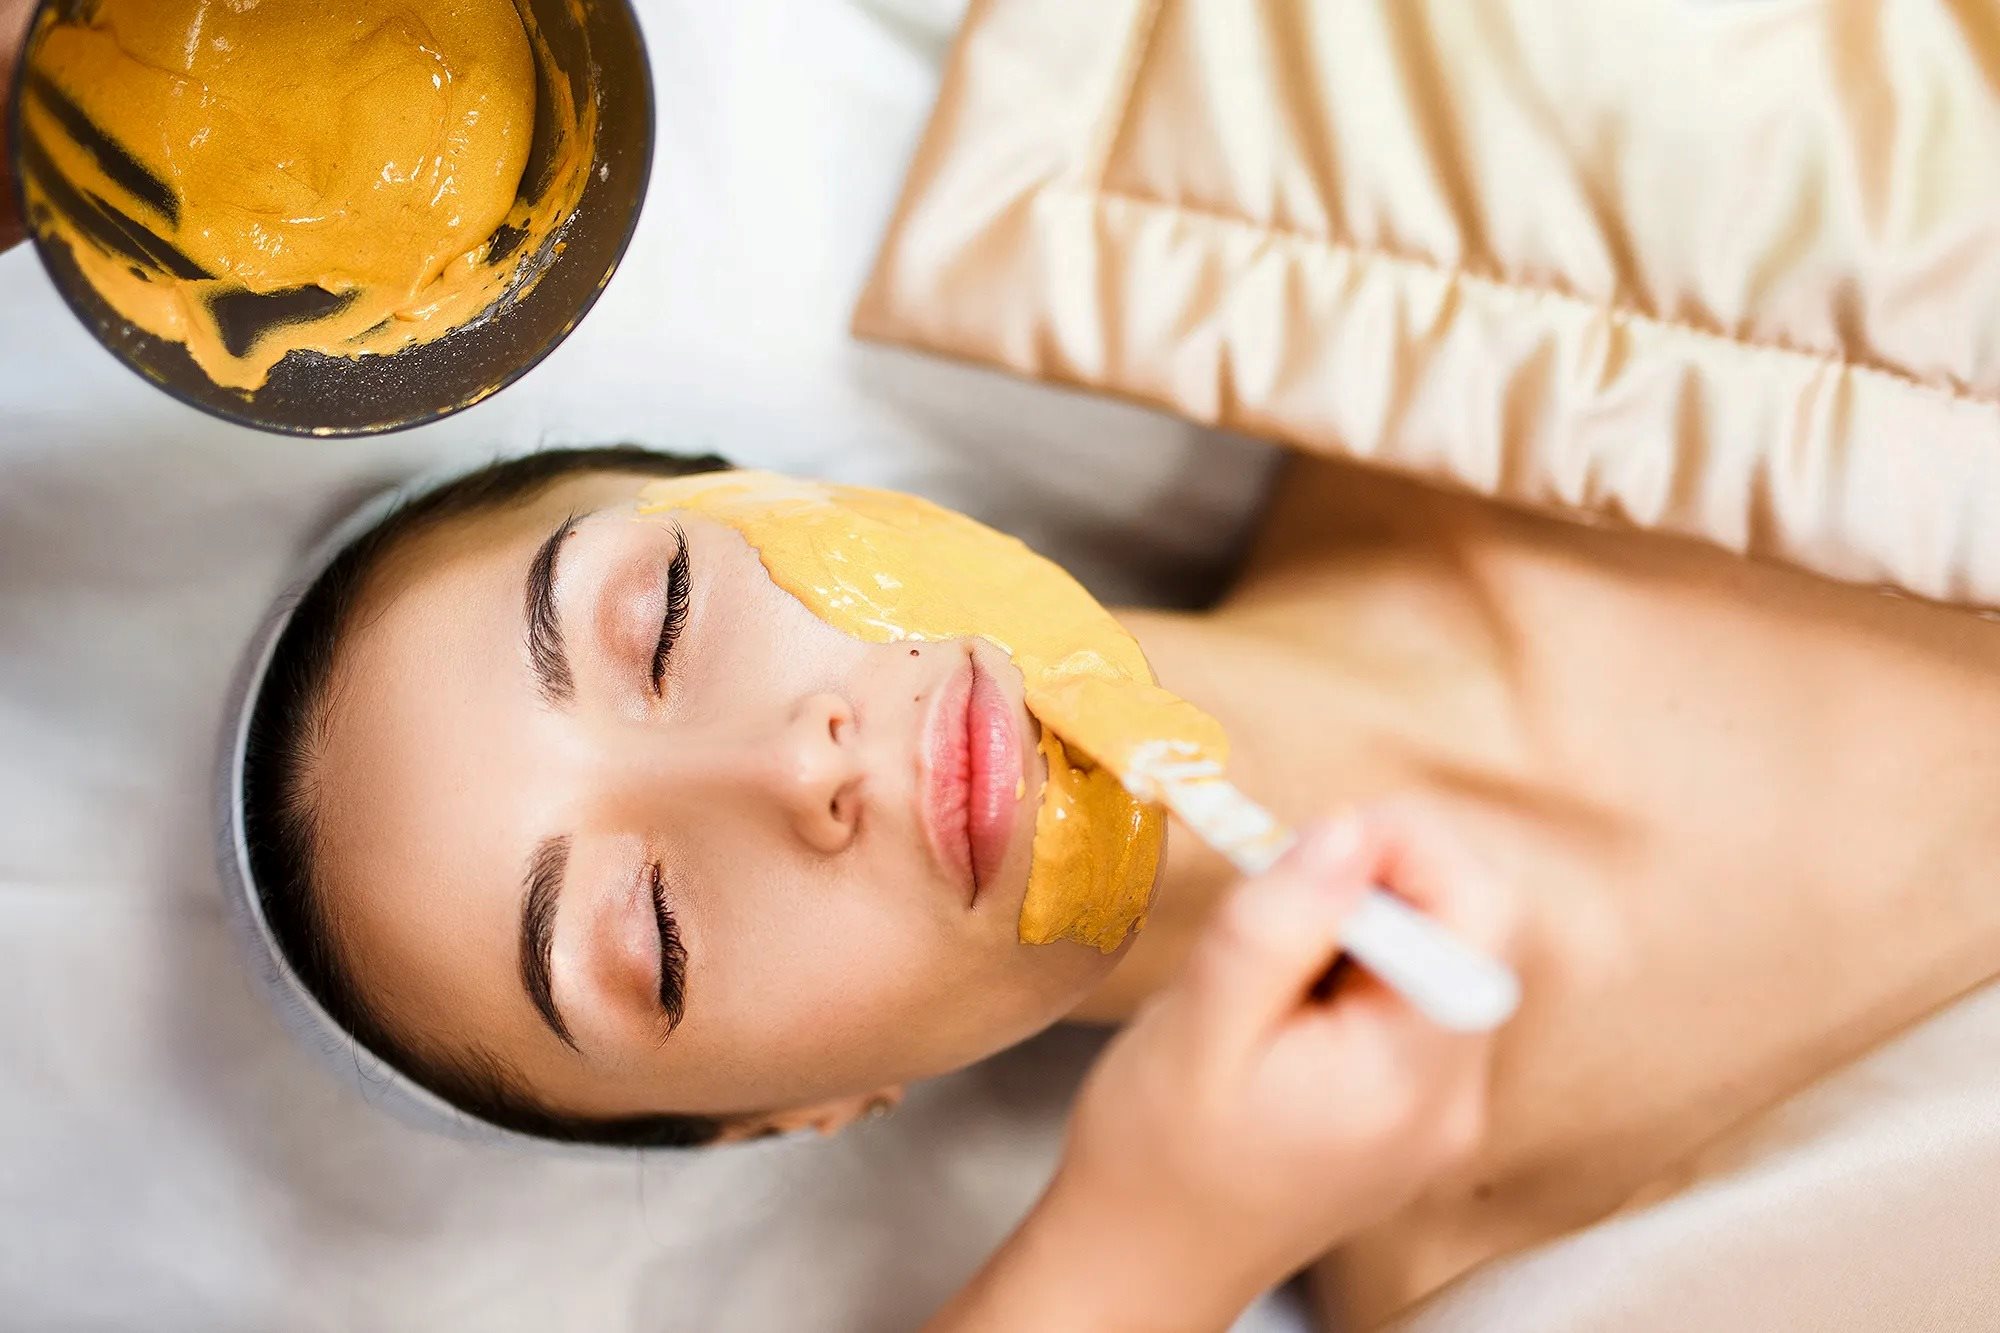 Get Glowing Skin With This DIY Honey, Tomato, And Turmeric Facial Scrub!